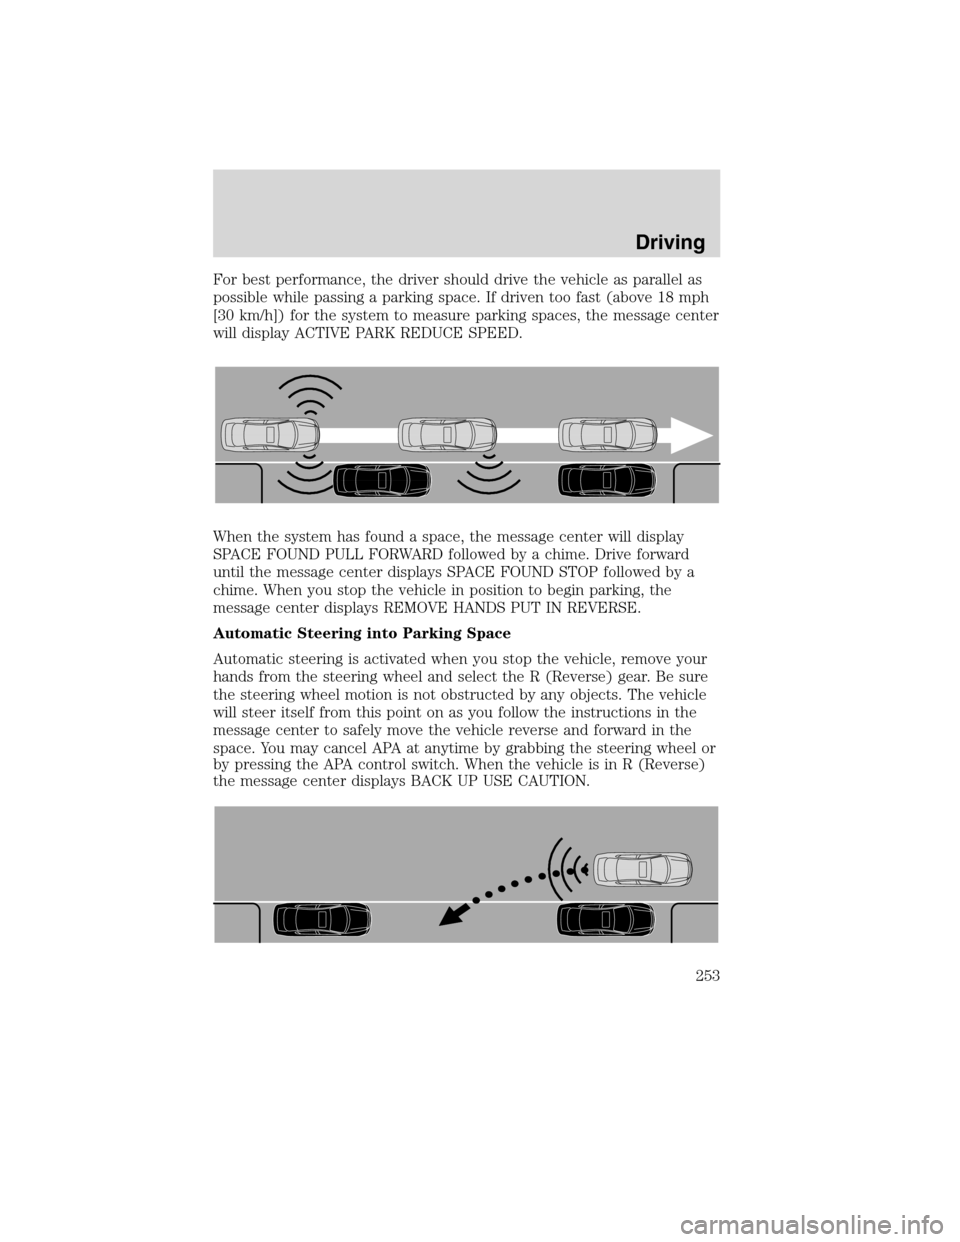 LINCOLN MKS 2010 Manual PDF For best performance, the driver should drive the vehicle as parallel as
possible while passing a parking space. If driven too fast (above 18 mph
[30 km/h]) for the system to measure parking spaces, t